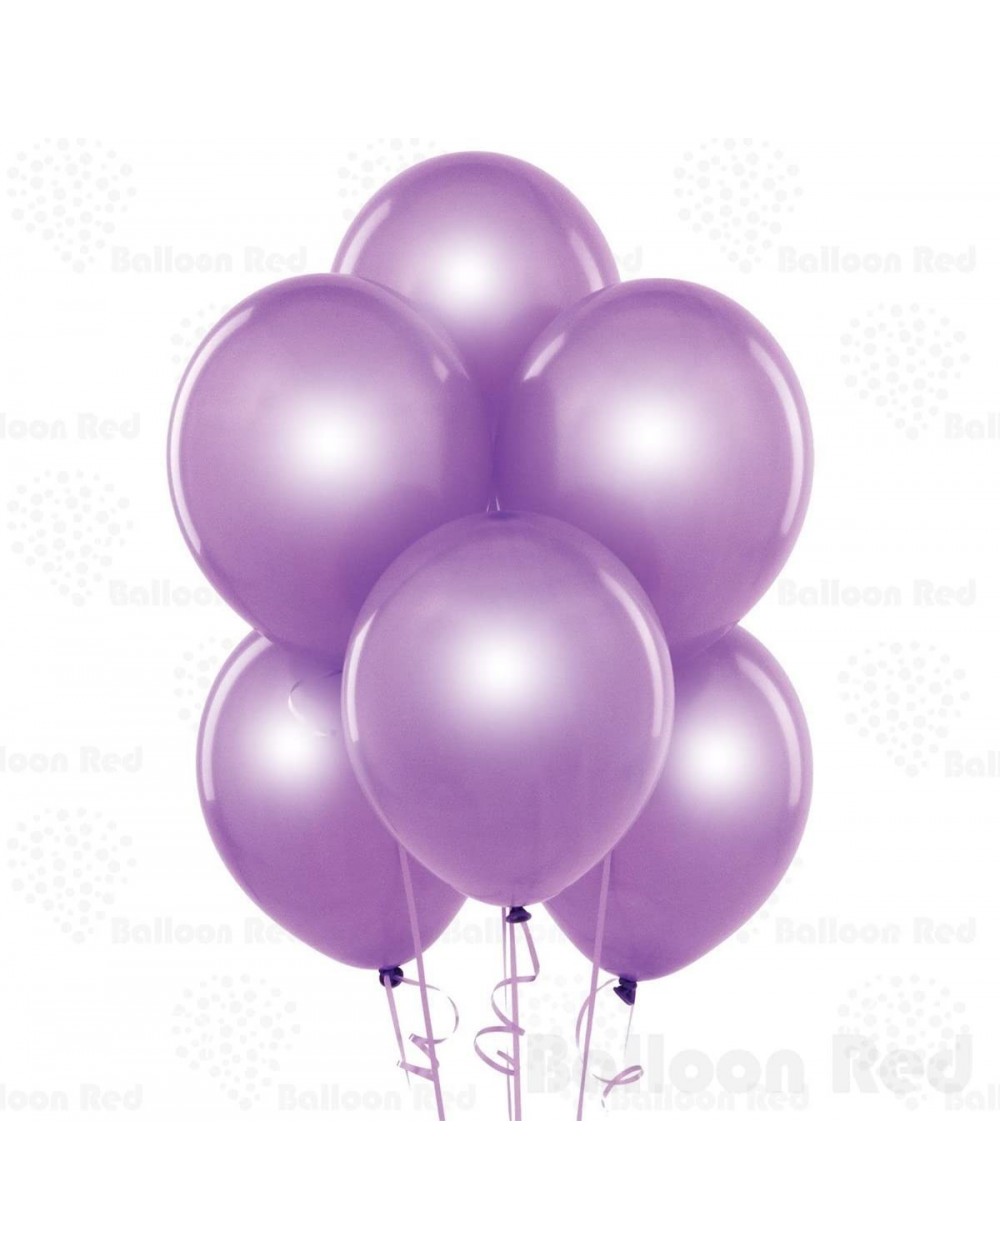 Balloons Pearl Lavender 10 Inch Latex Balloons 144 Pack Thickened Extra Strong for Baby Shower Garland Wedding Photo Booth Bi...